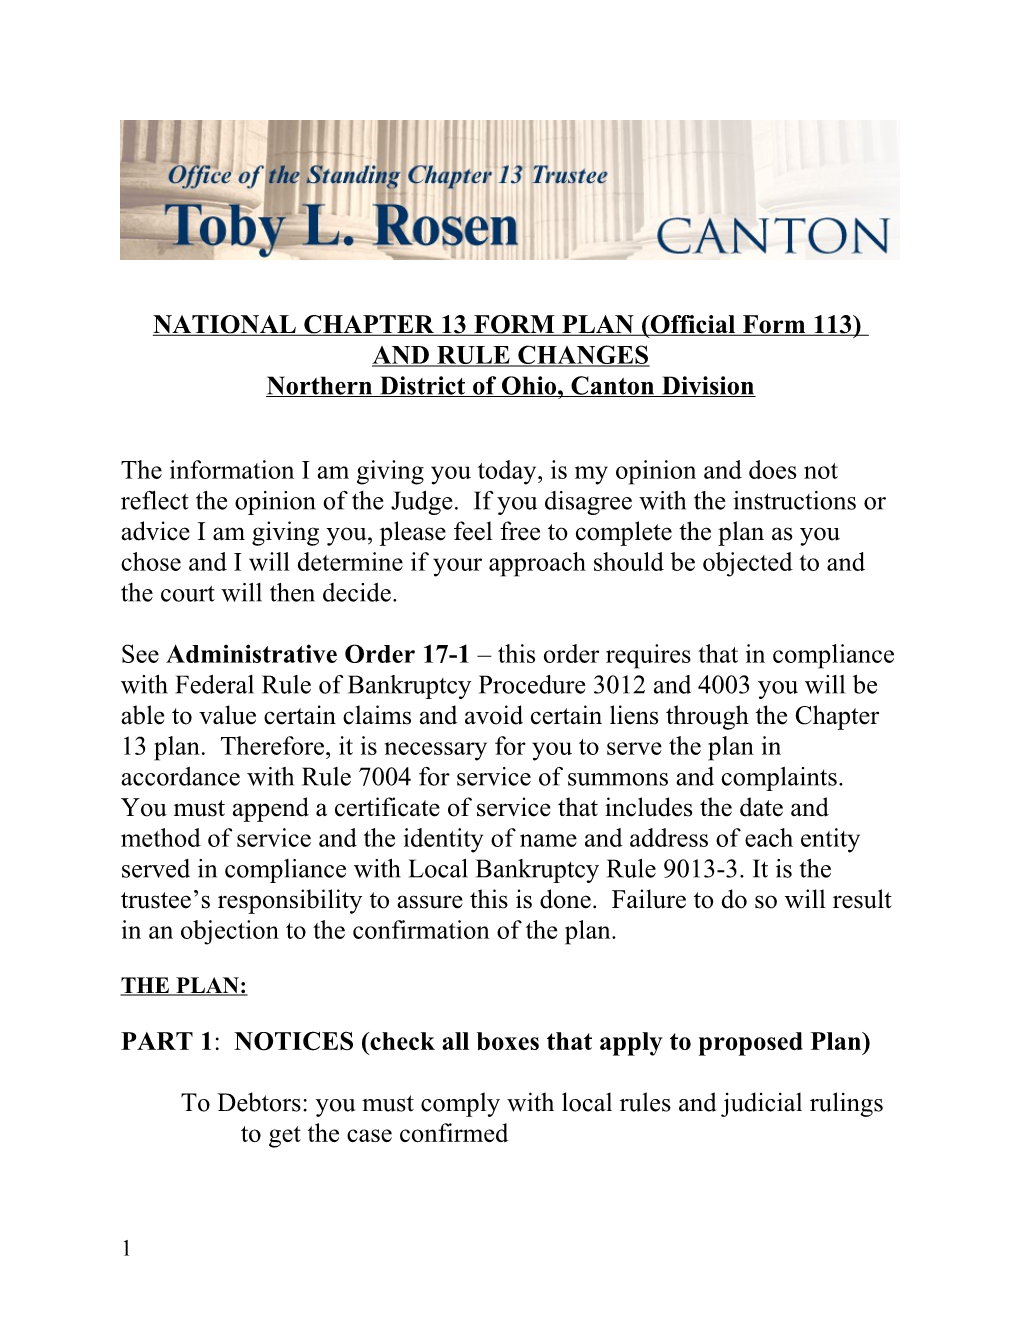 NATIONAL CHAPTER 13 FORM PLAN (Official Form 113)